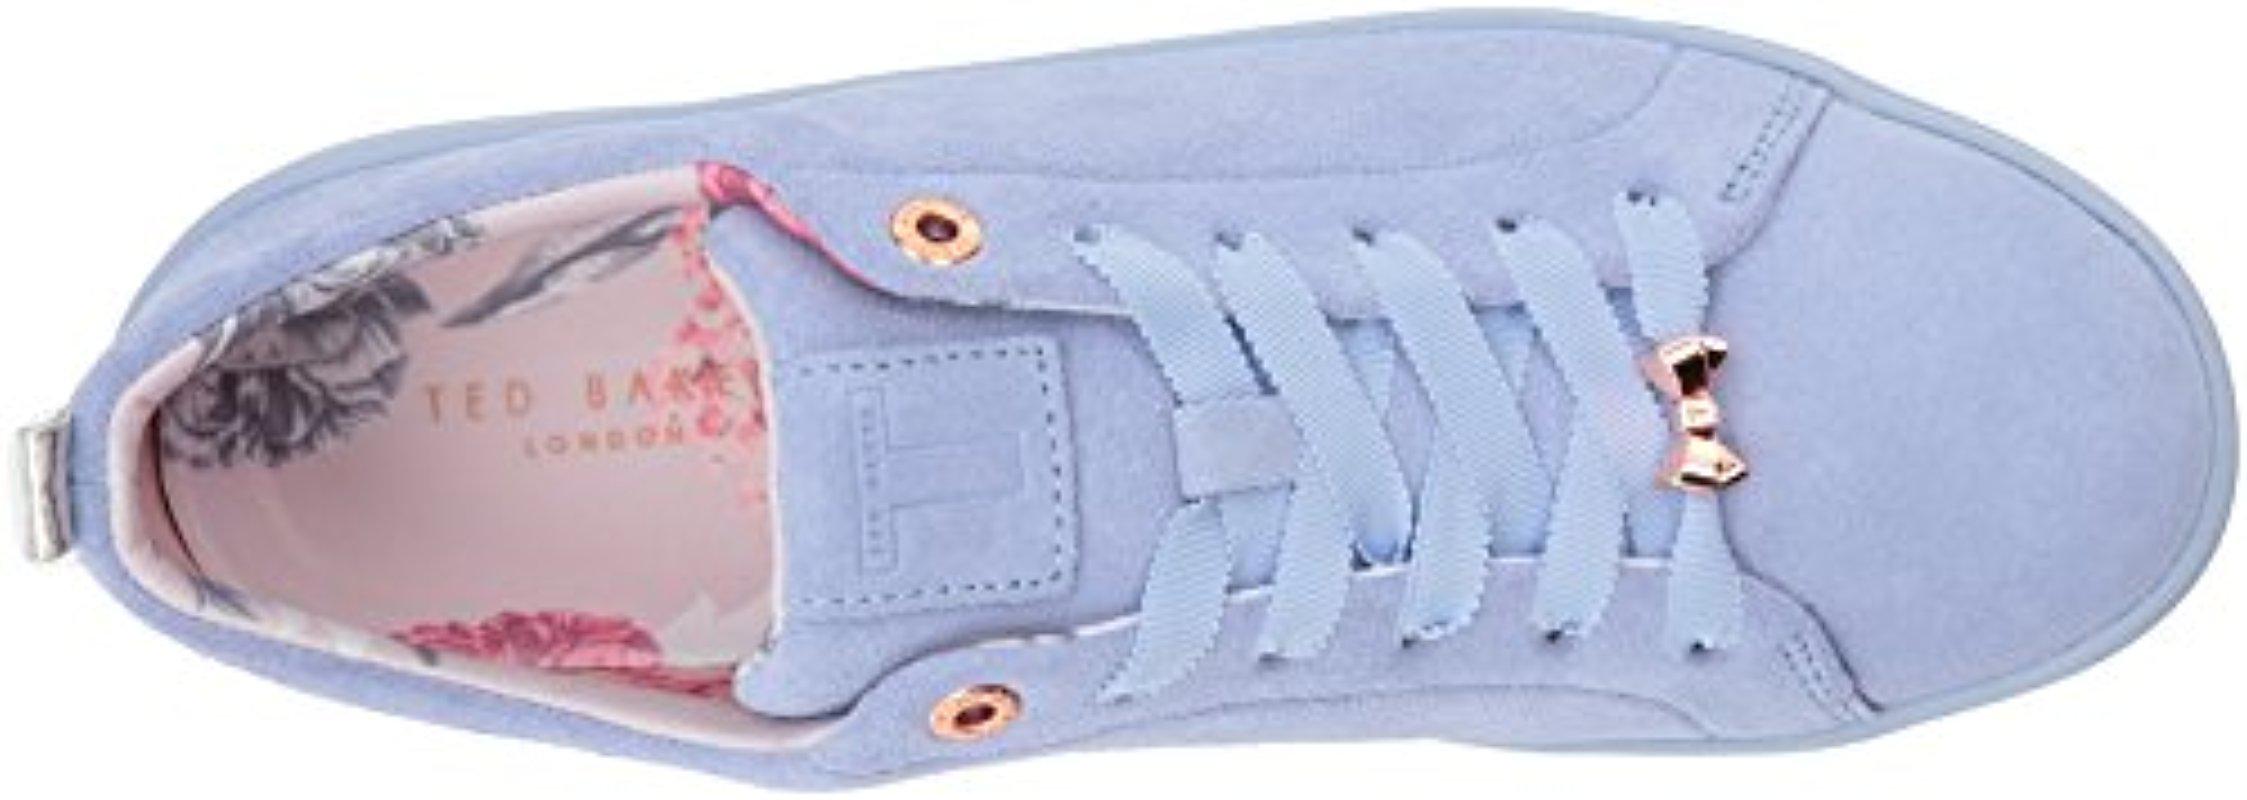 Ted Baker Suede S Kellei Trainers in Light Blue Suede (Blue) - Lyst